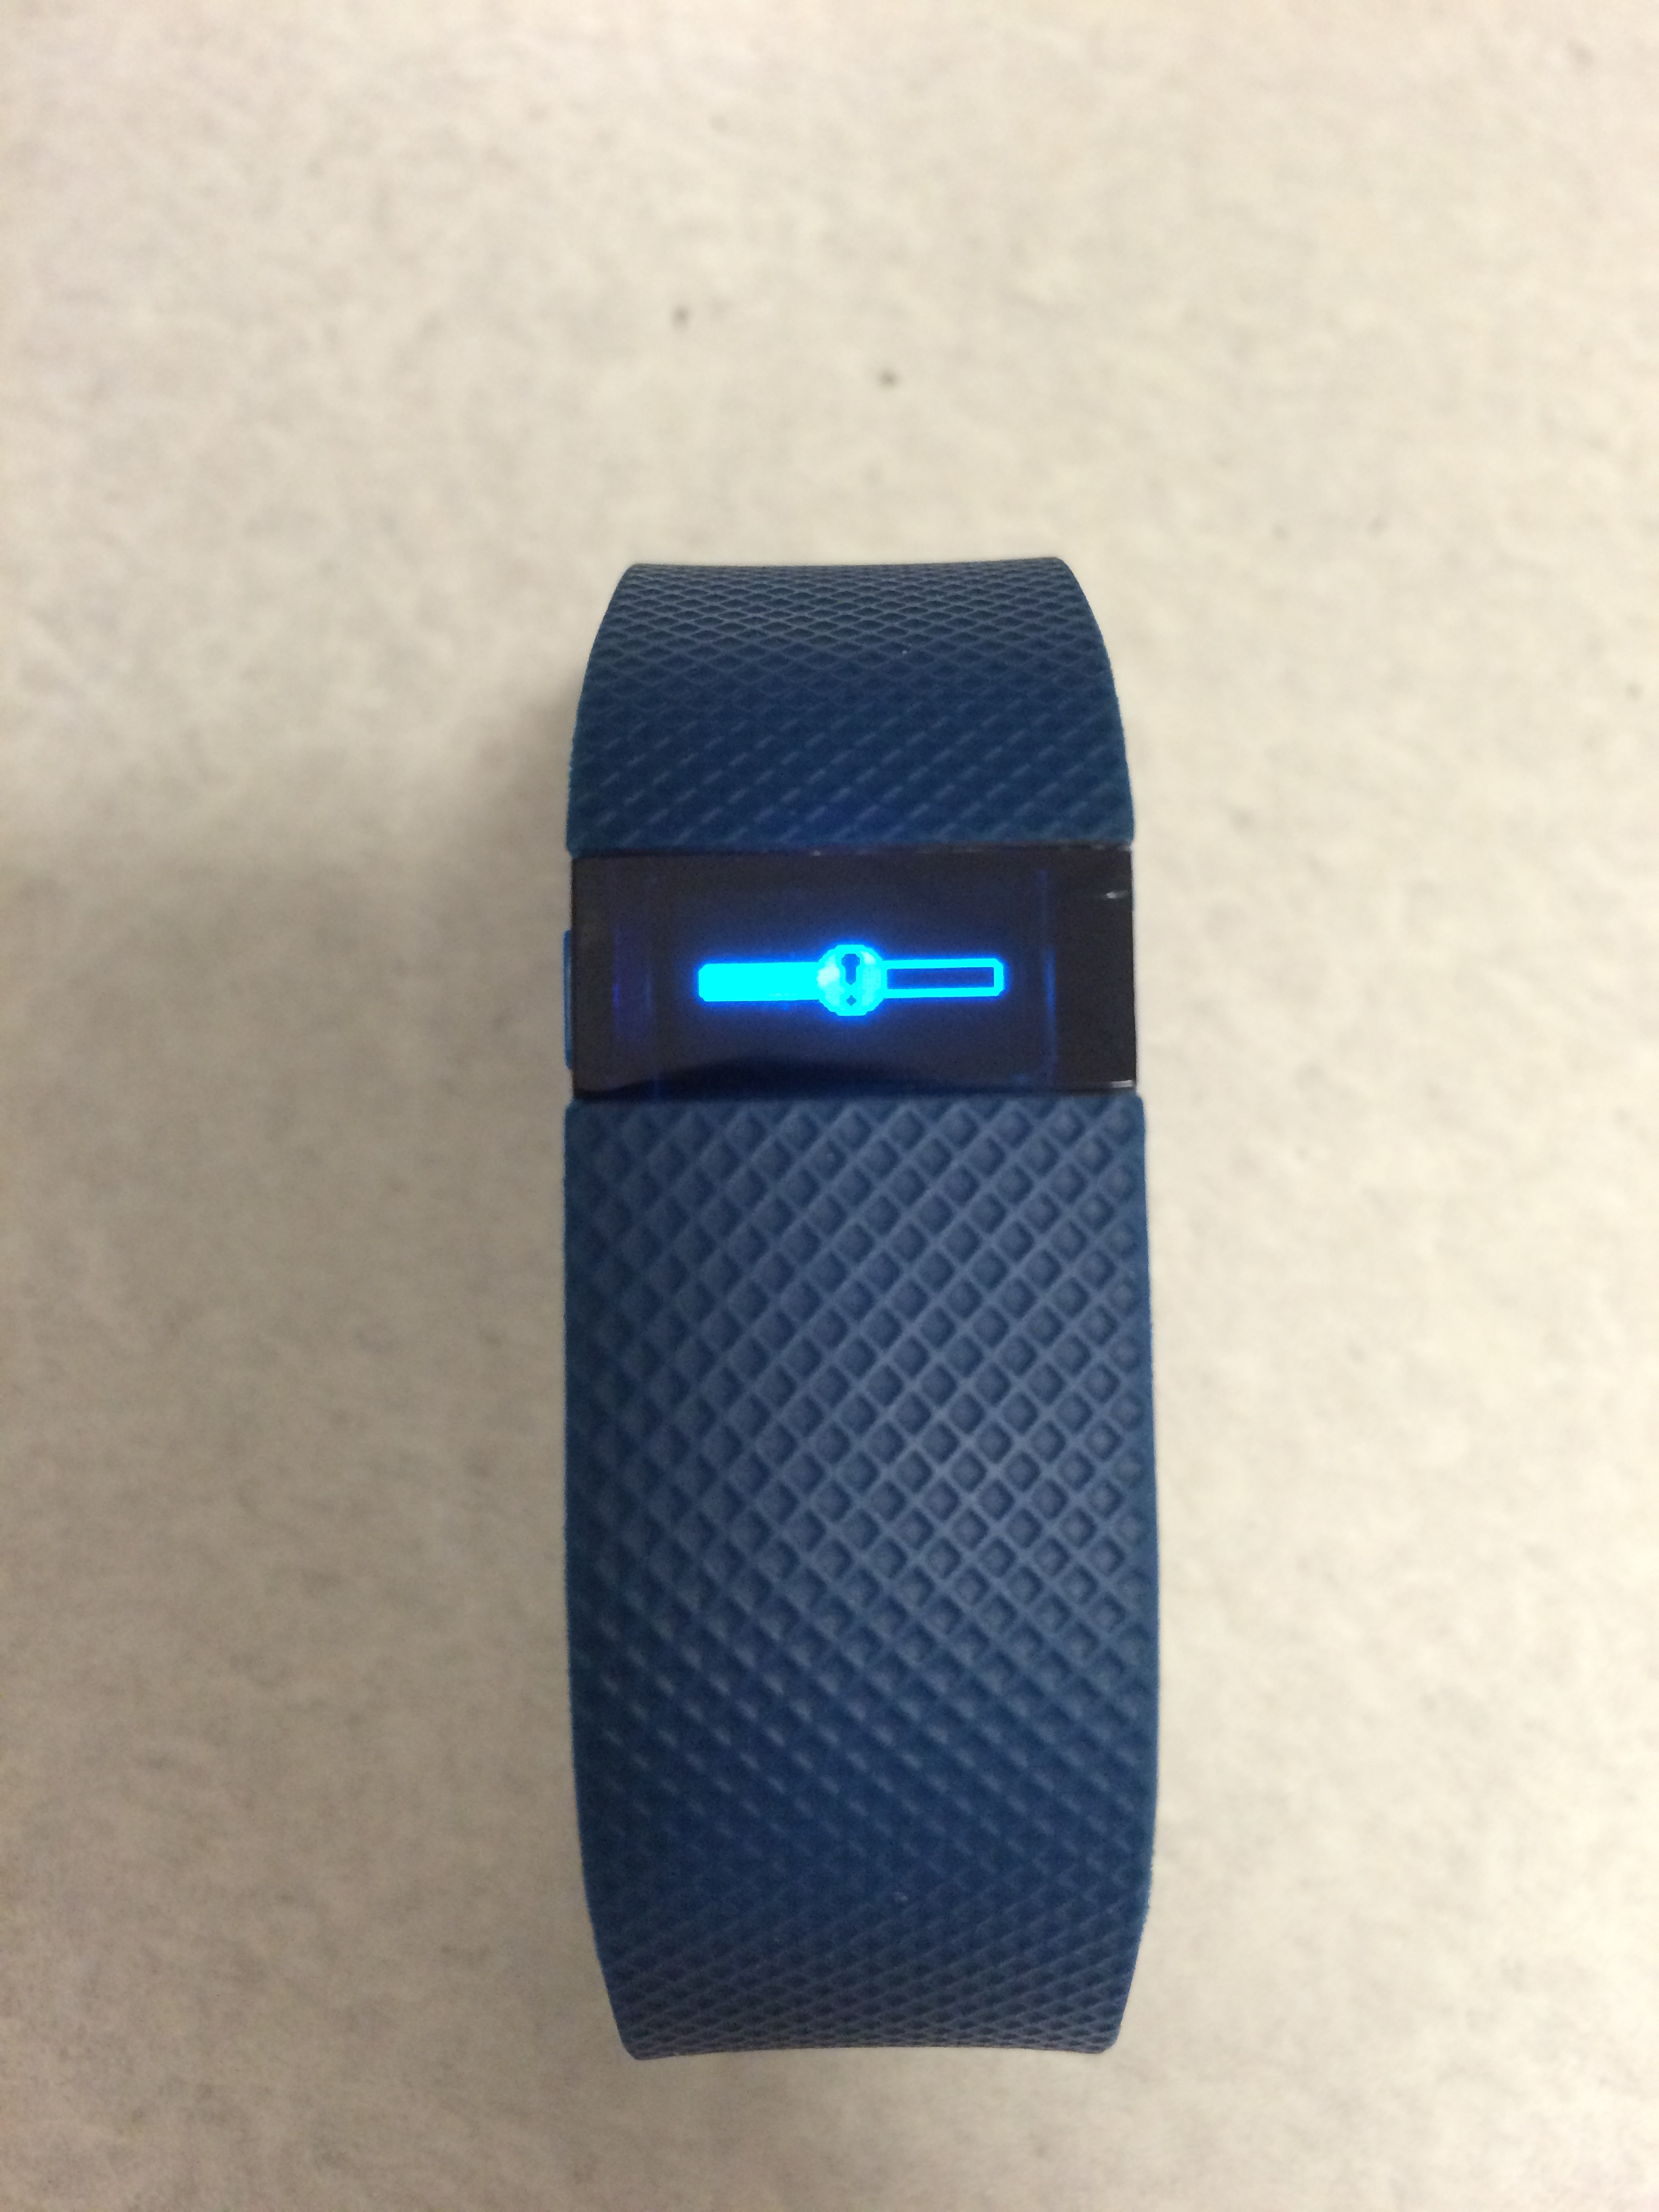 fitbit alta battery exclamation point